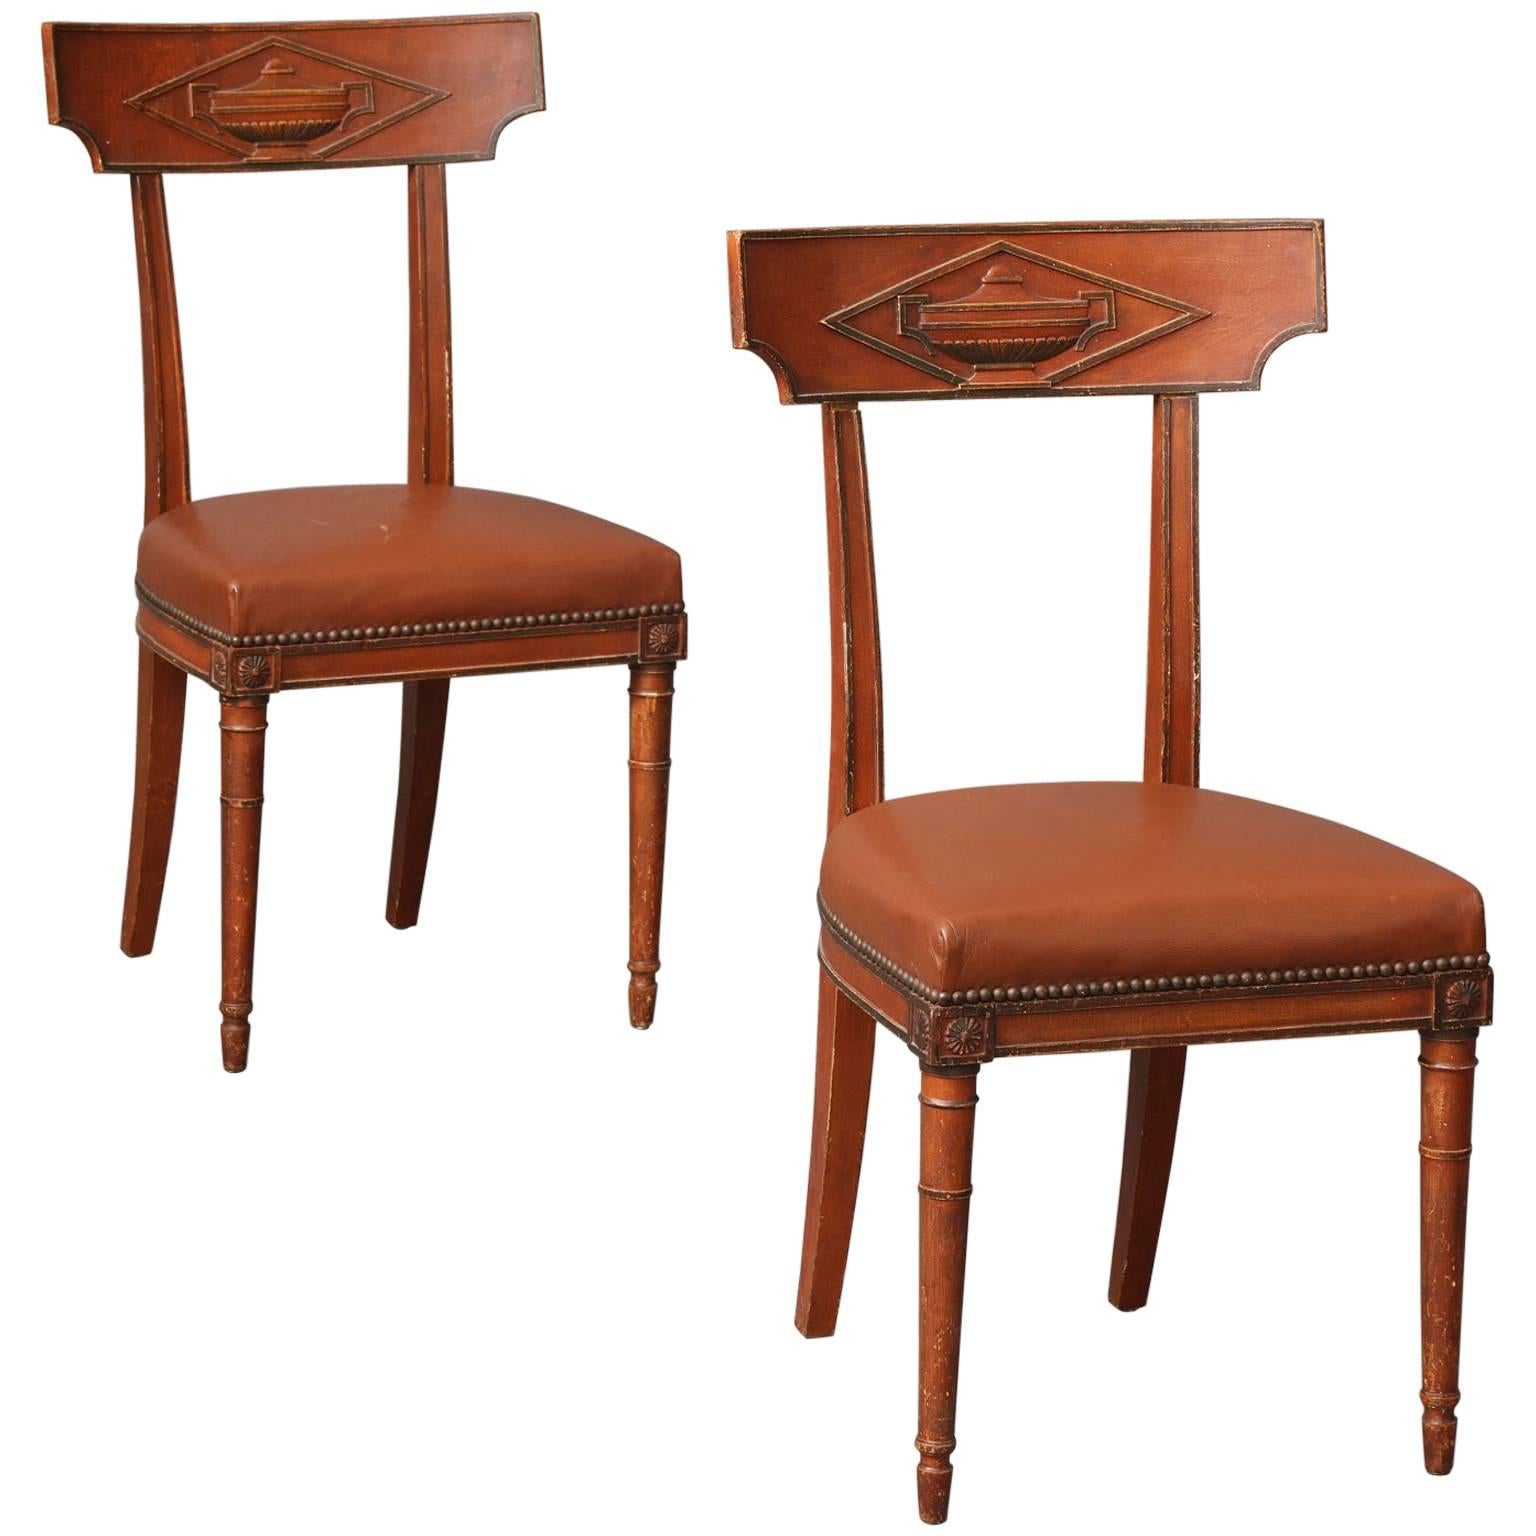 Maison Jansen Directoire Style Side Chairs in Terracotta Red